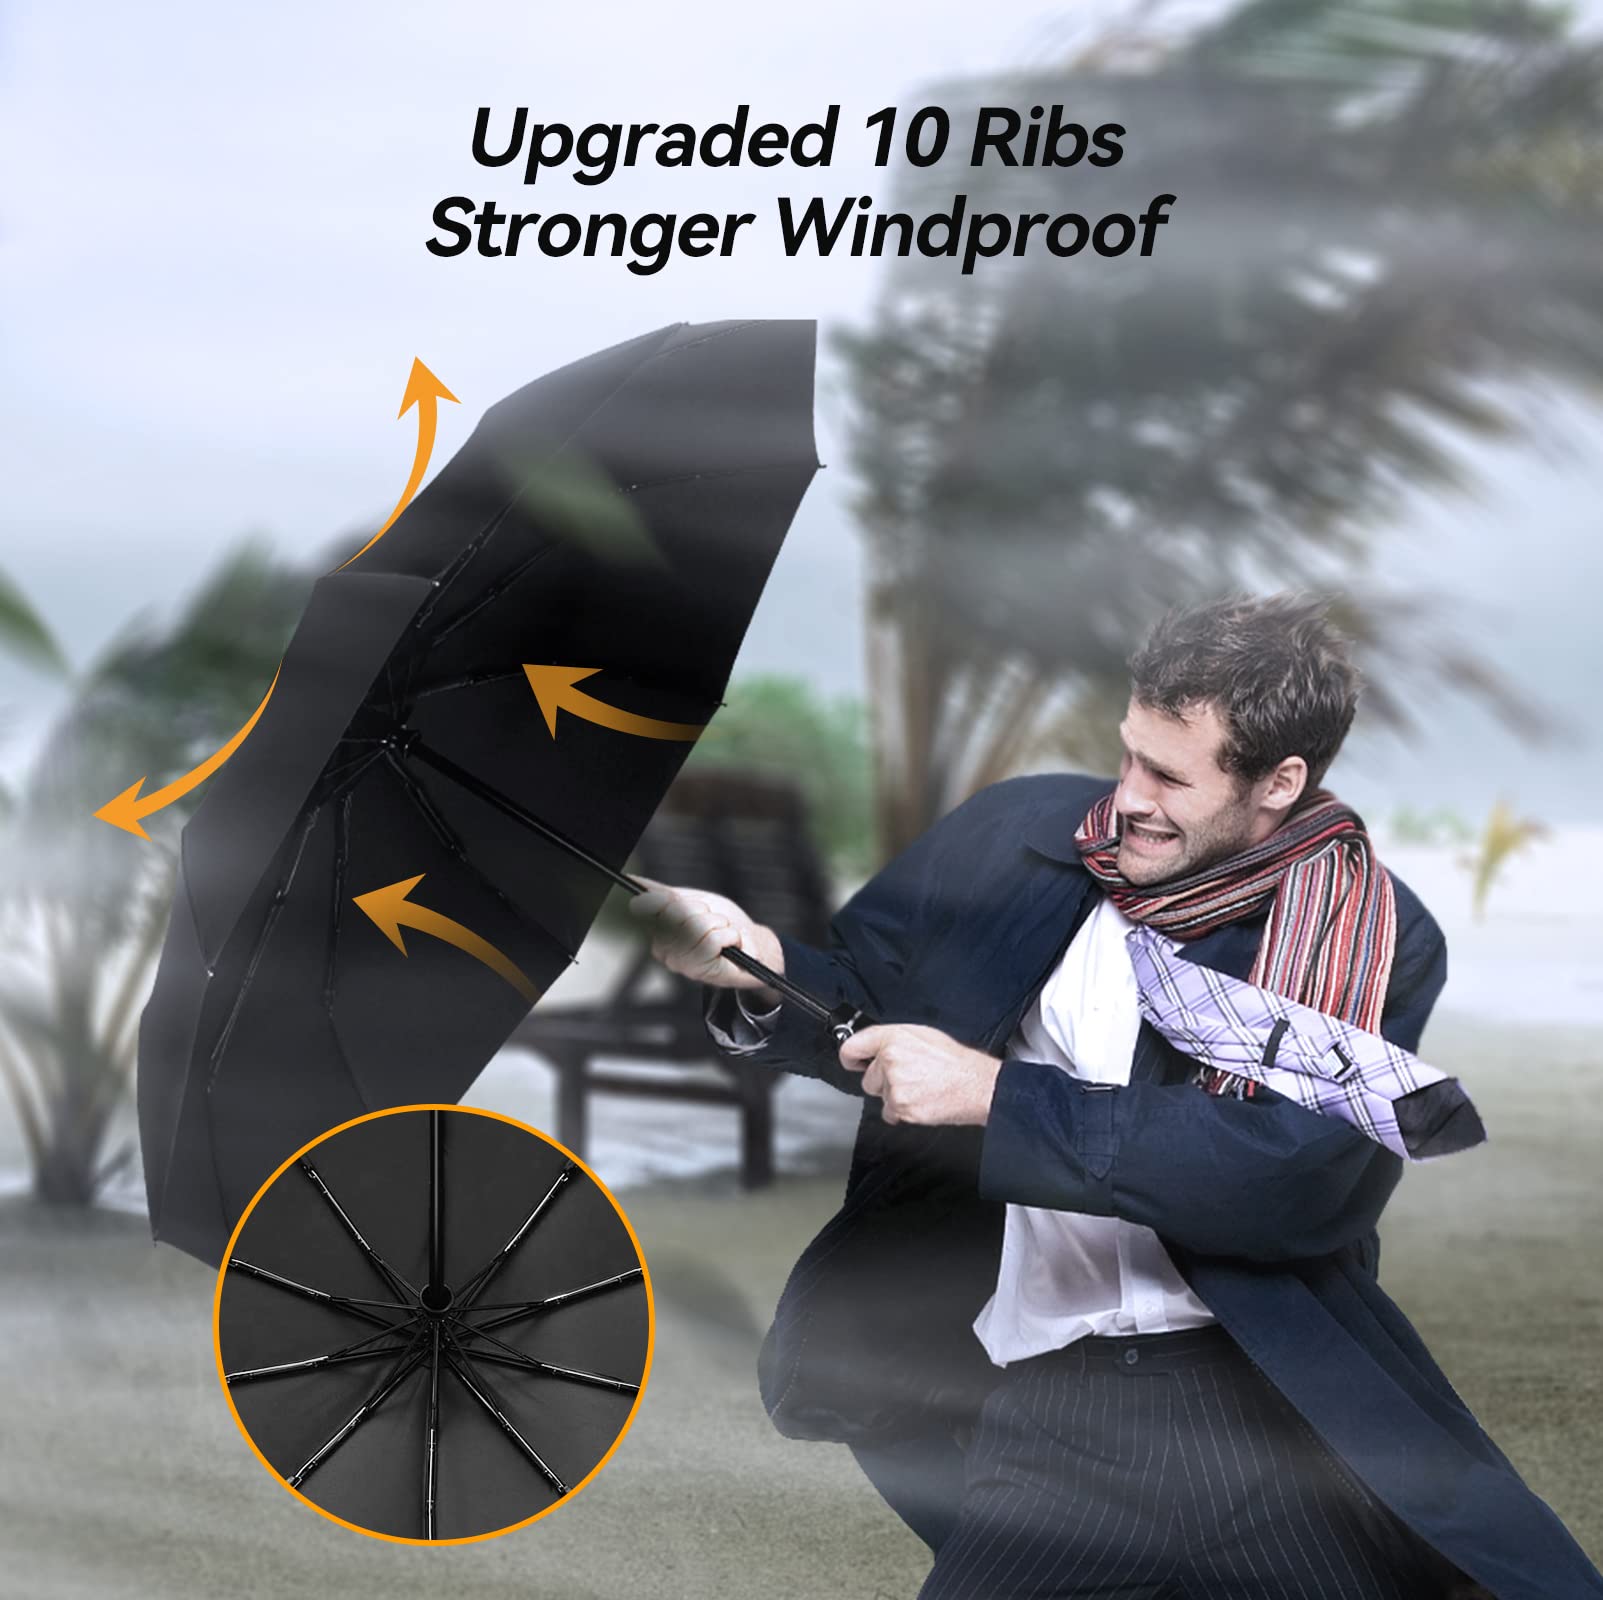 TechRise Windproof Umbrella with 10 Ribs